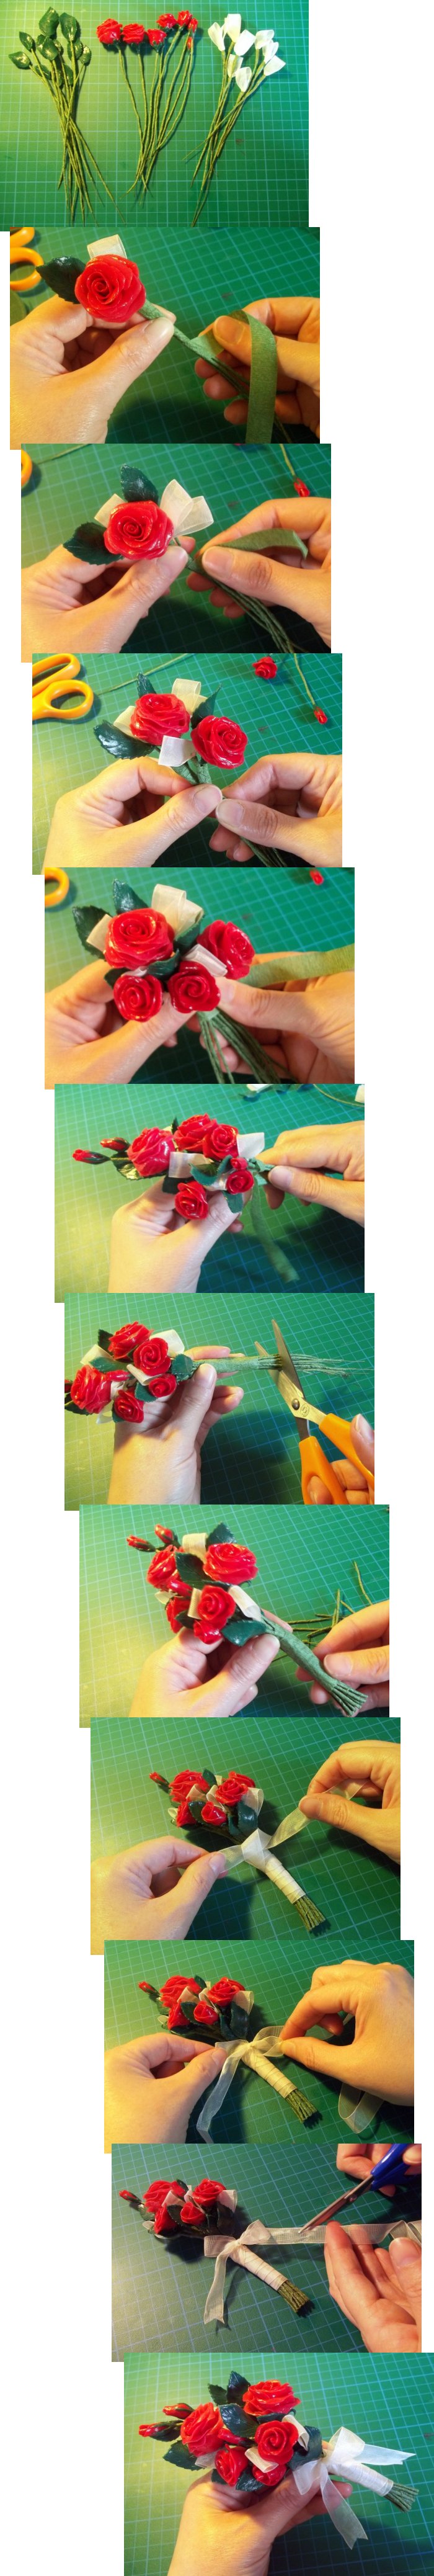 Things to make and do - making Cold Porcelain Roses